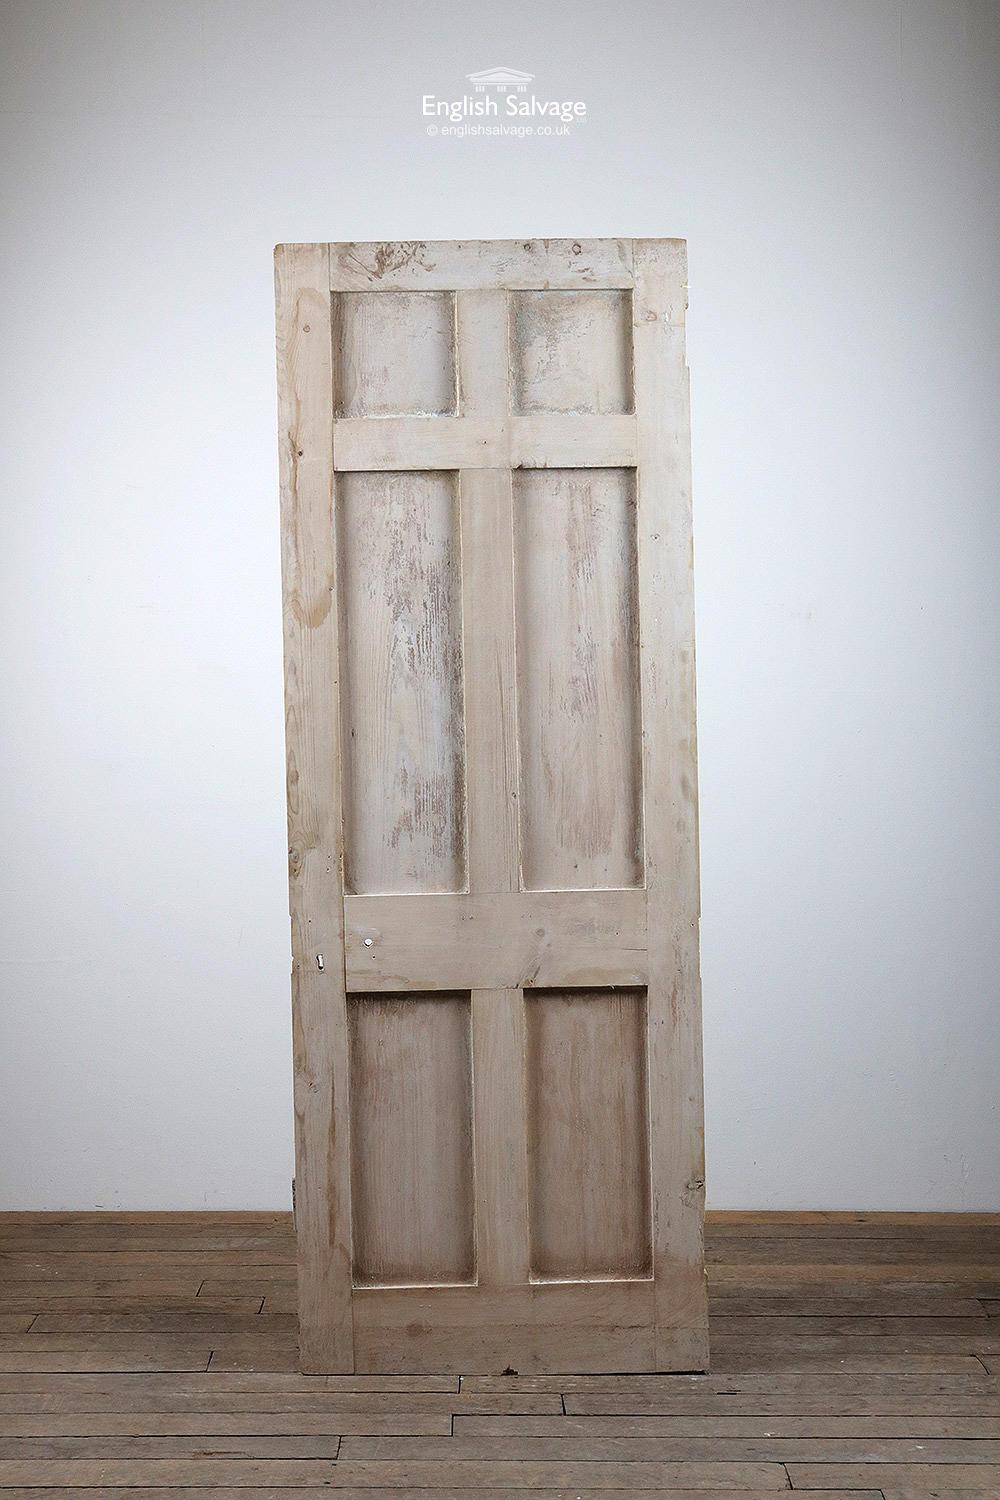 Reclaimed six panel pine door, plain both sides. Has been cut on a slant, the height varies from 194cm-195.5cm. Old fitting holes, hinge cut outs. Door has been partly stripped, some traces of paint remain.